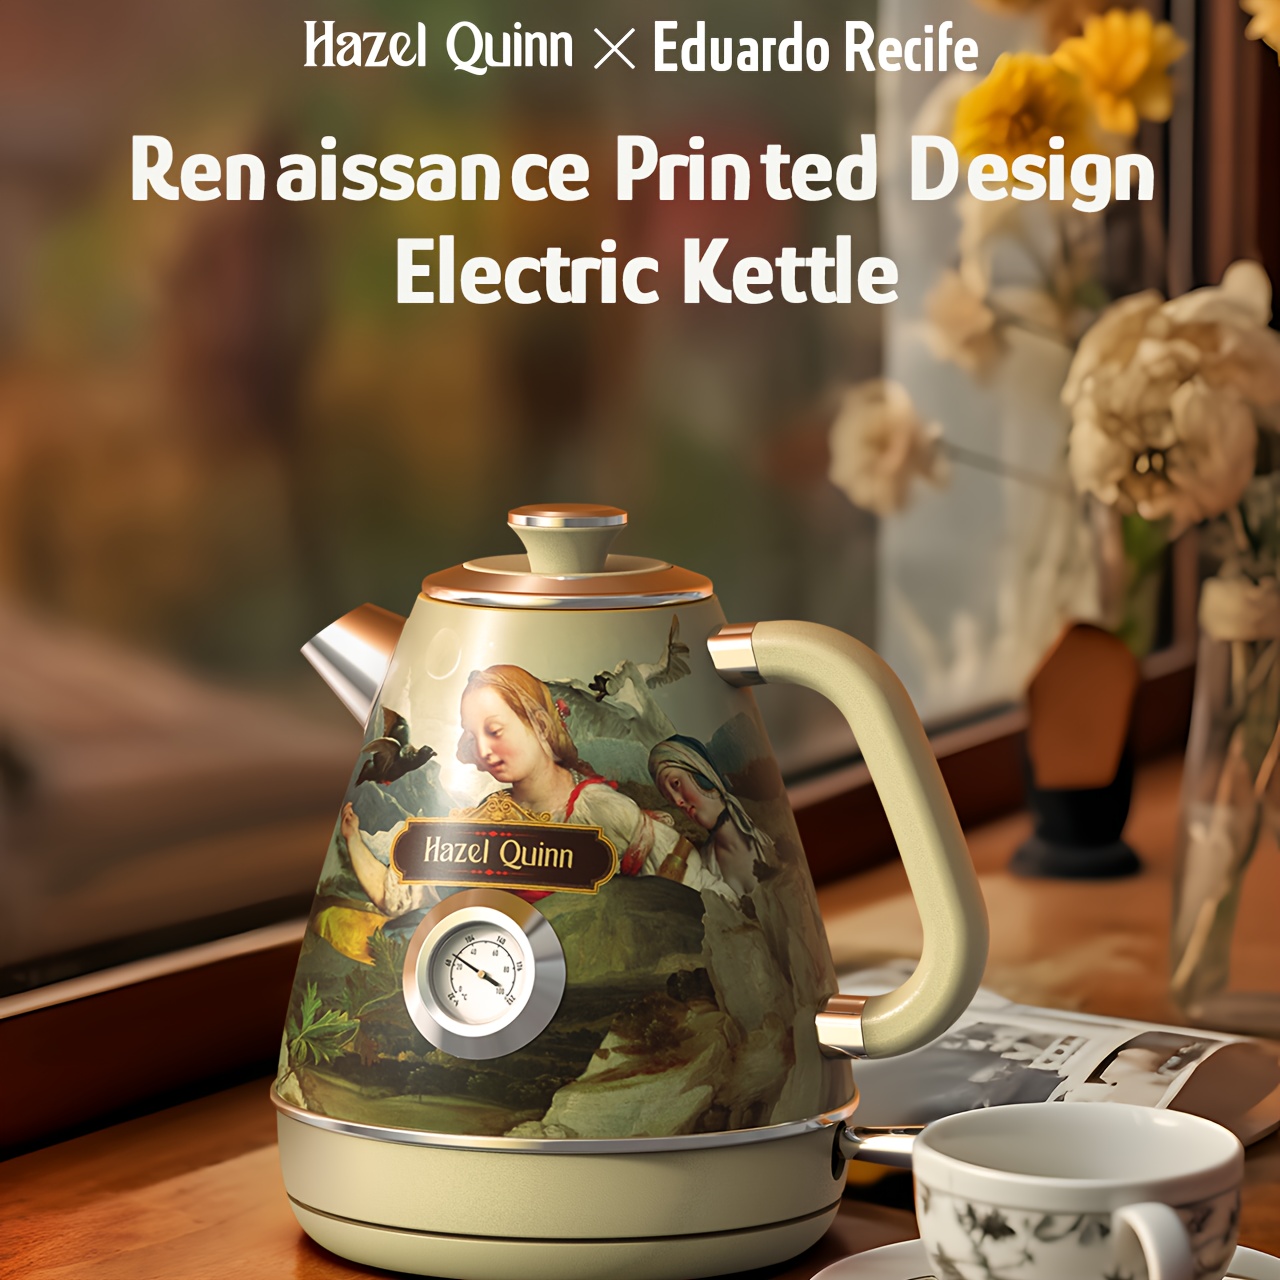 

Hazel Quinn X Eduardo Recife Collaboration Electric Retro Tea Kettle With Thermometer 1.7 Litres/57.5 Ounces, All Stainless Steel, Fast Boiling 1200w, Cordless, Bpa-free, Automatic Shut-off